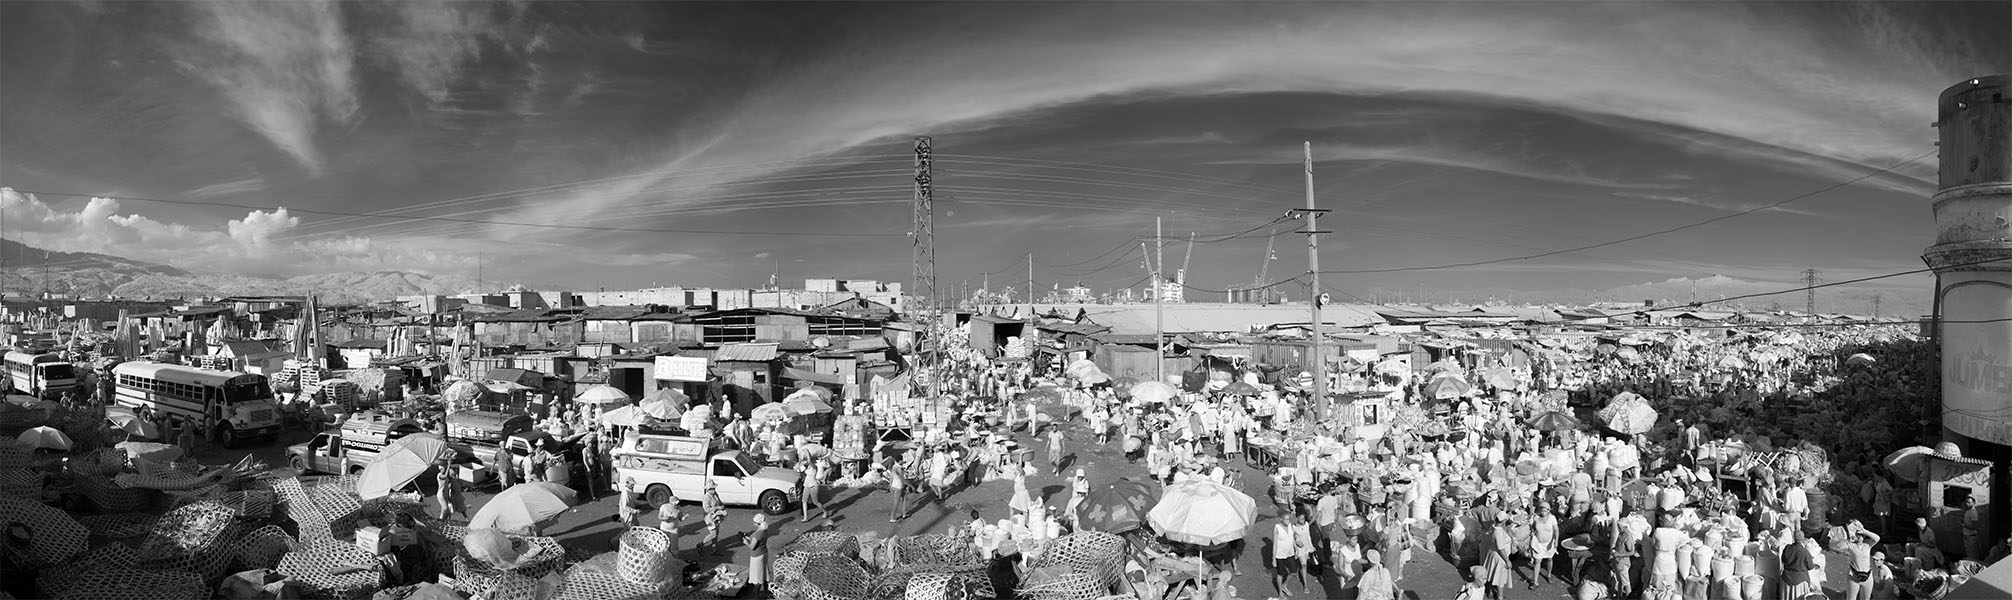 Infrared Panorama of a Large Traditional Market in Port-au-Prince, Haiti.